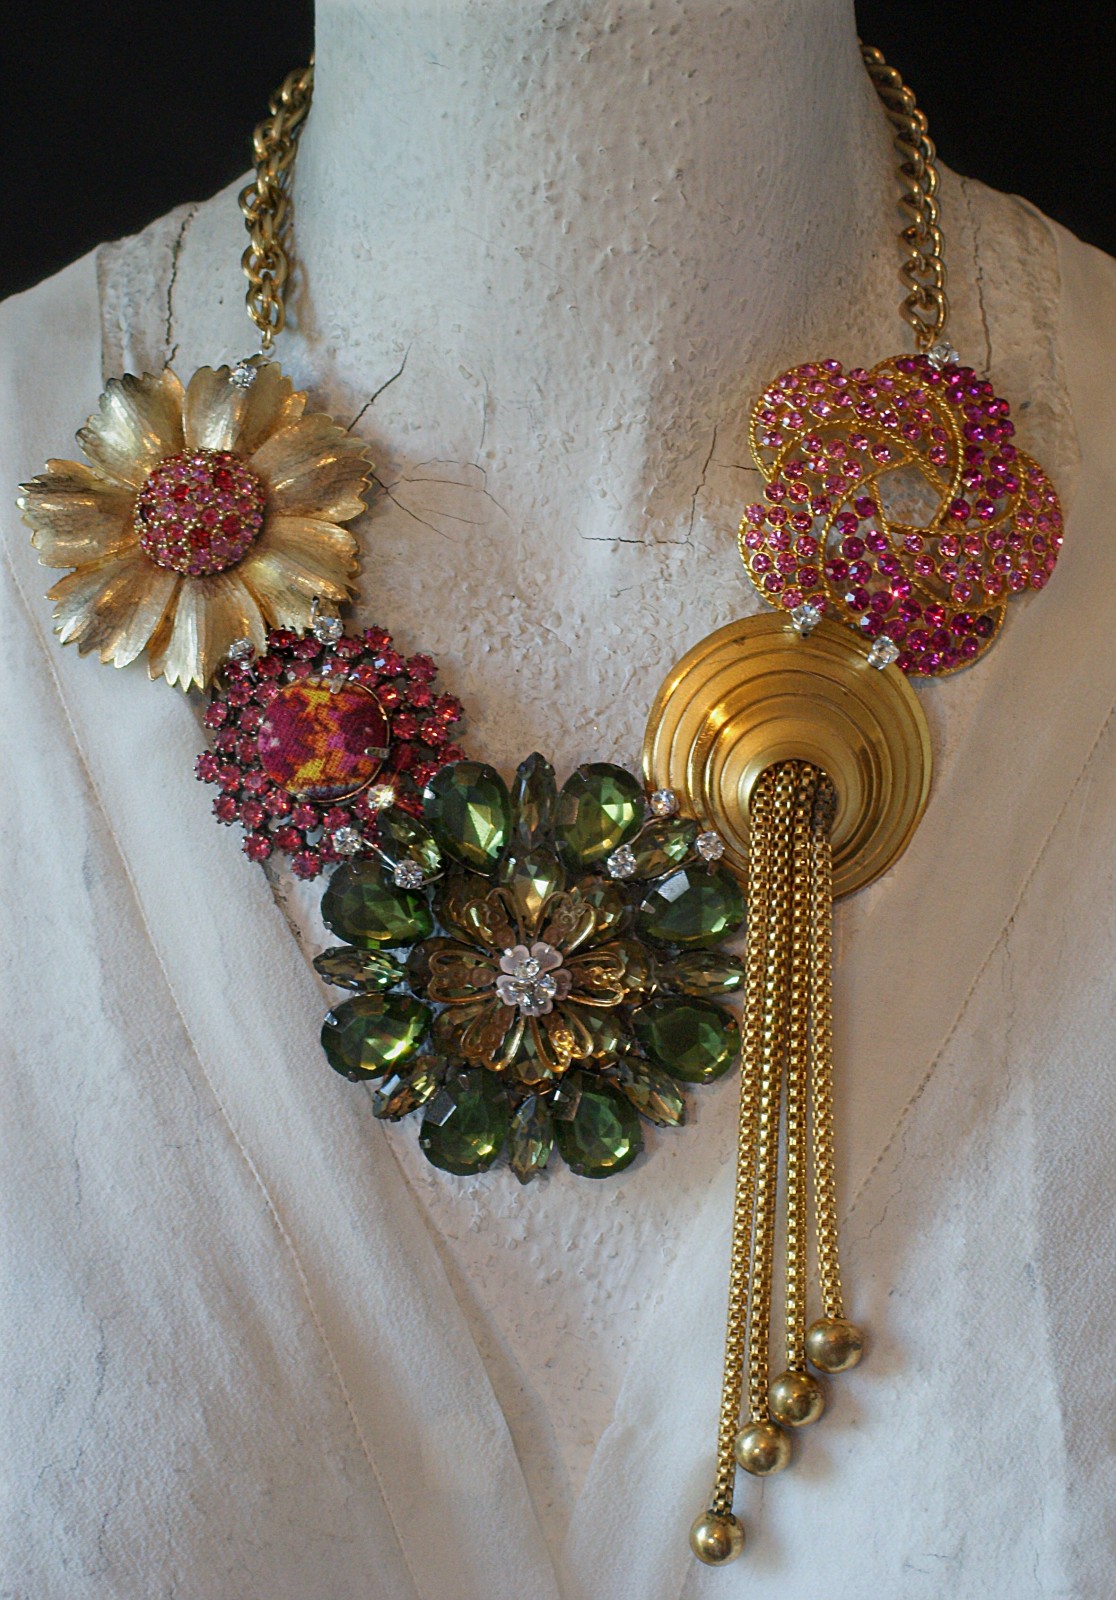 Beautiful Adornment: Jewelry To Make Others Drool by Kay Adams